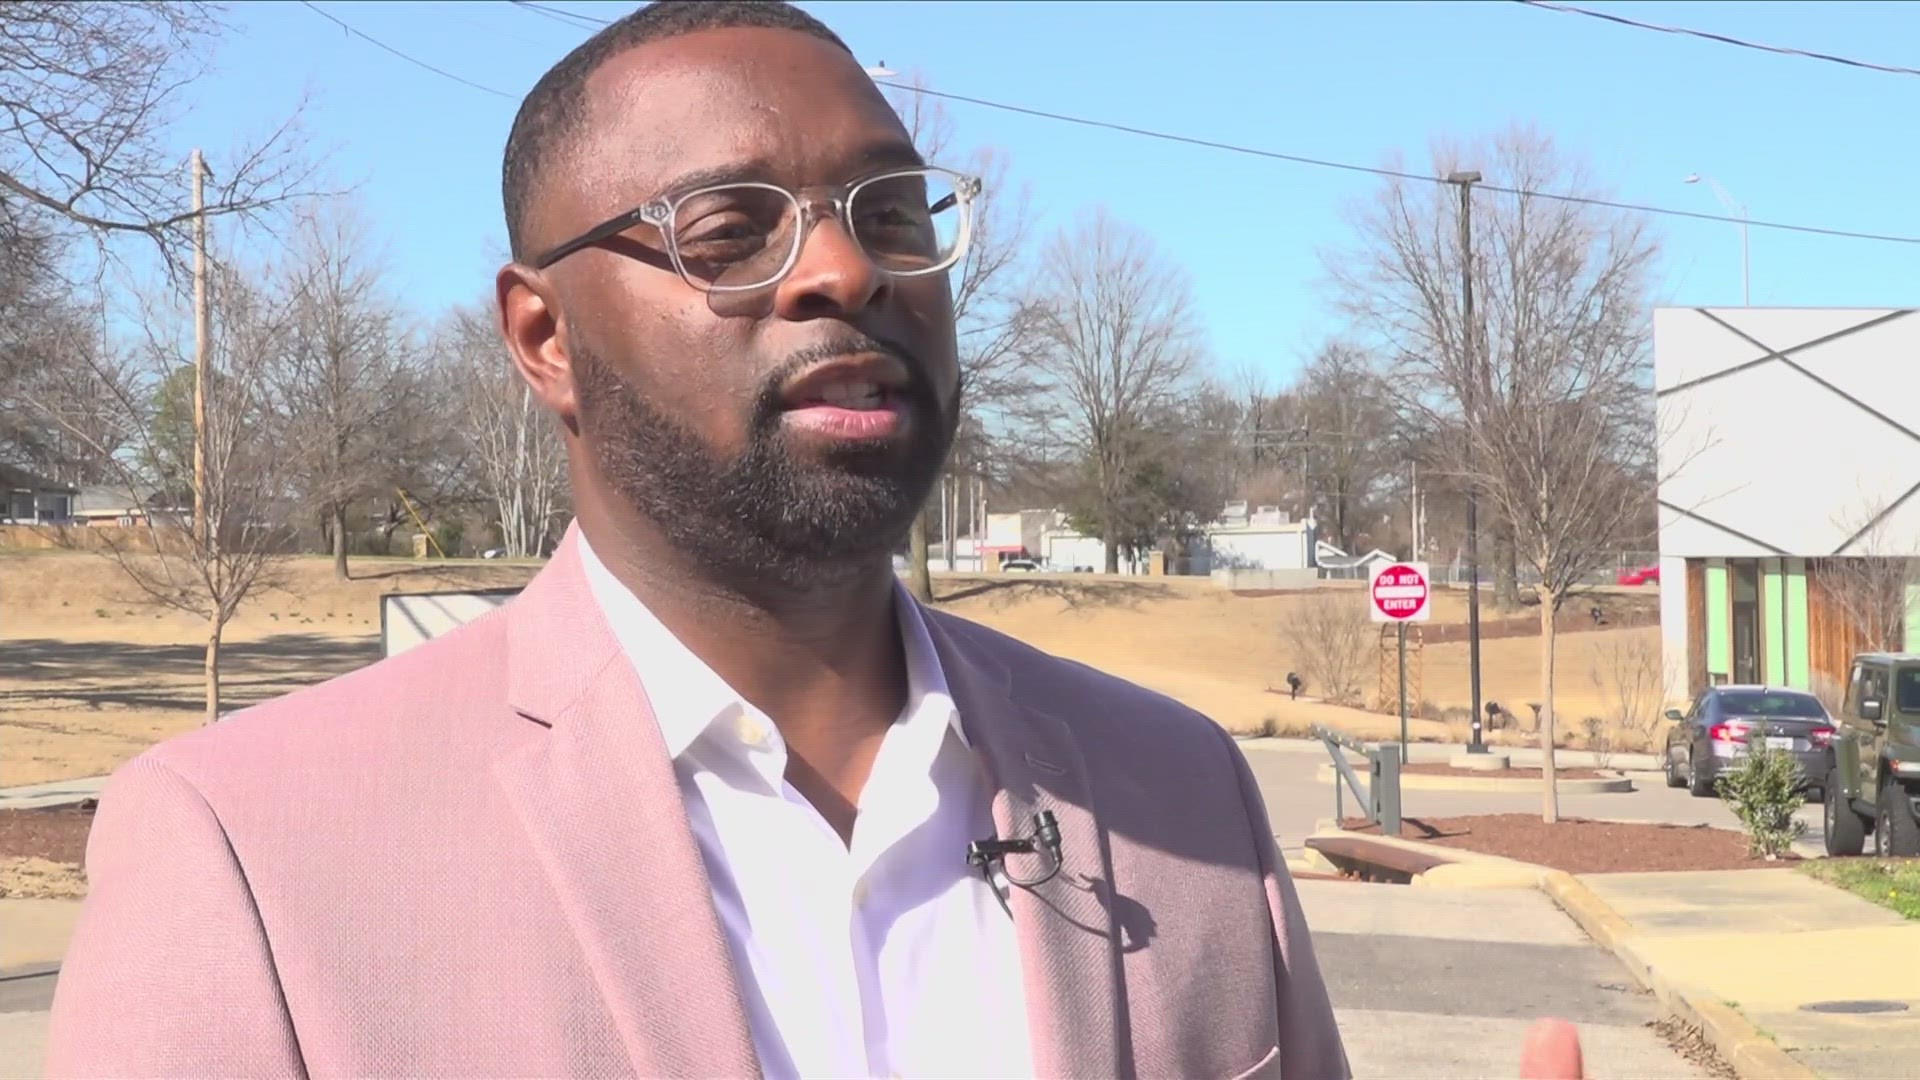 The mayor of Memphis said he is looking to apply a specific crime-reduction strategy originating elsewhere in the country to the city.